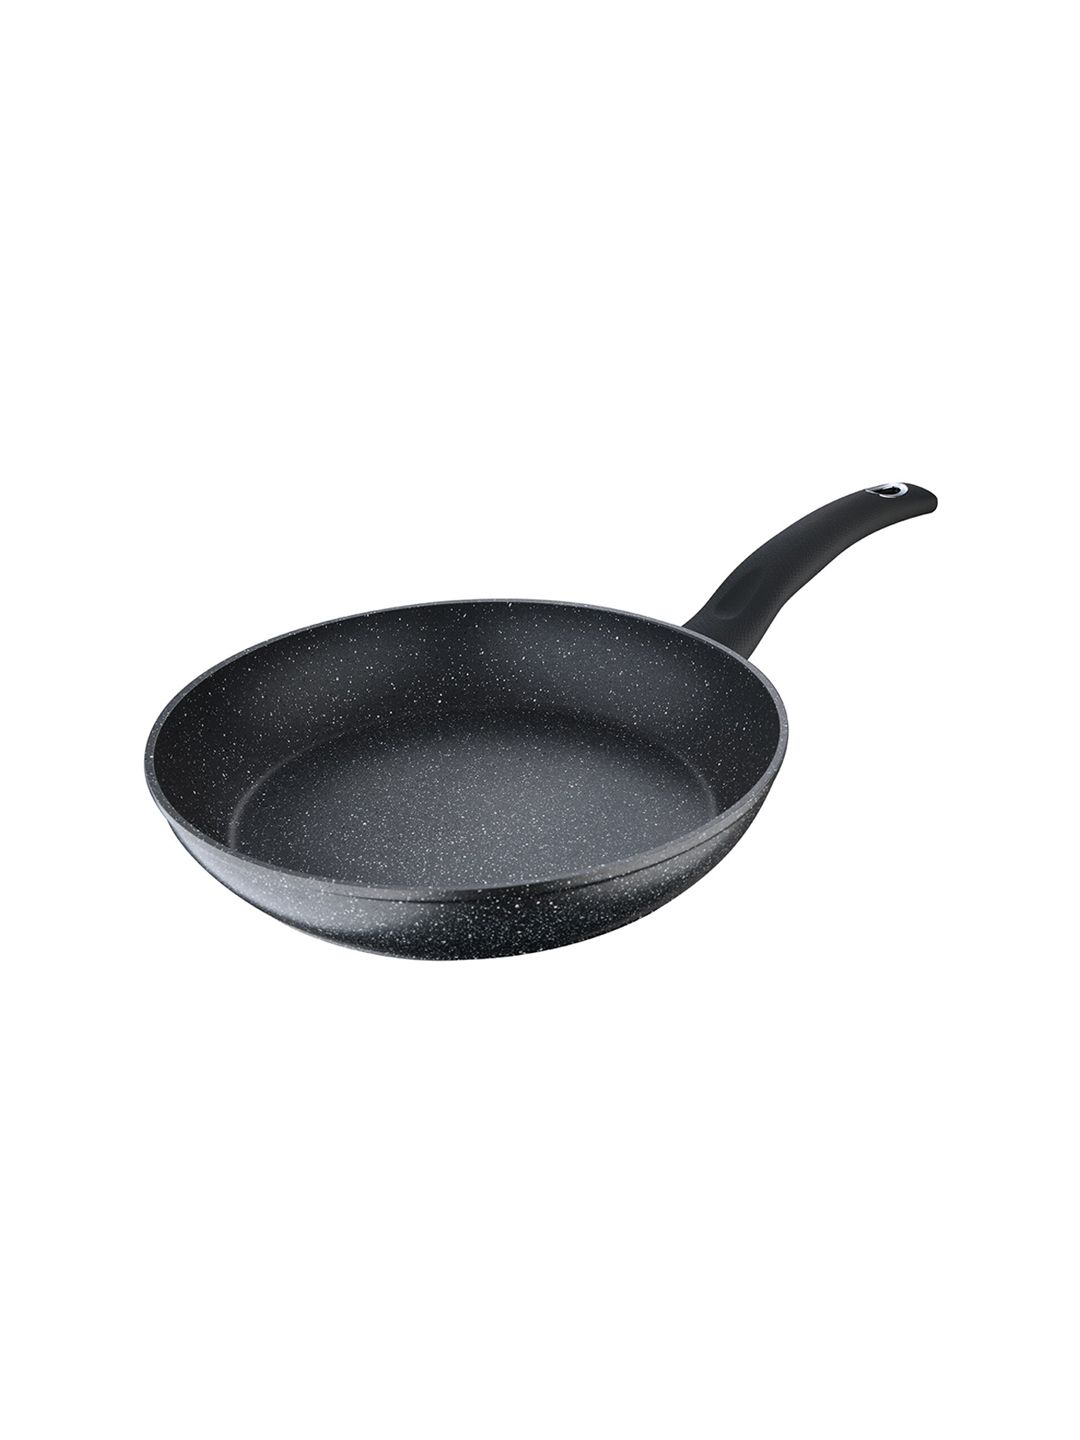 BERGNER Grey Solid Non-stick Frypan Price in India